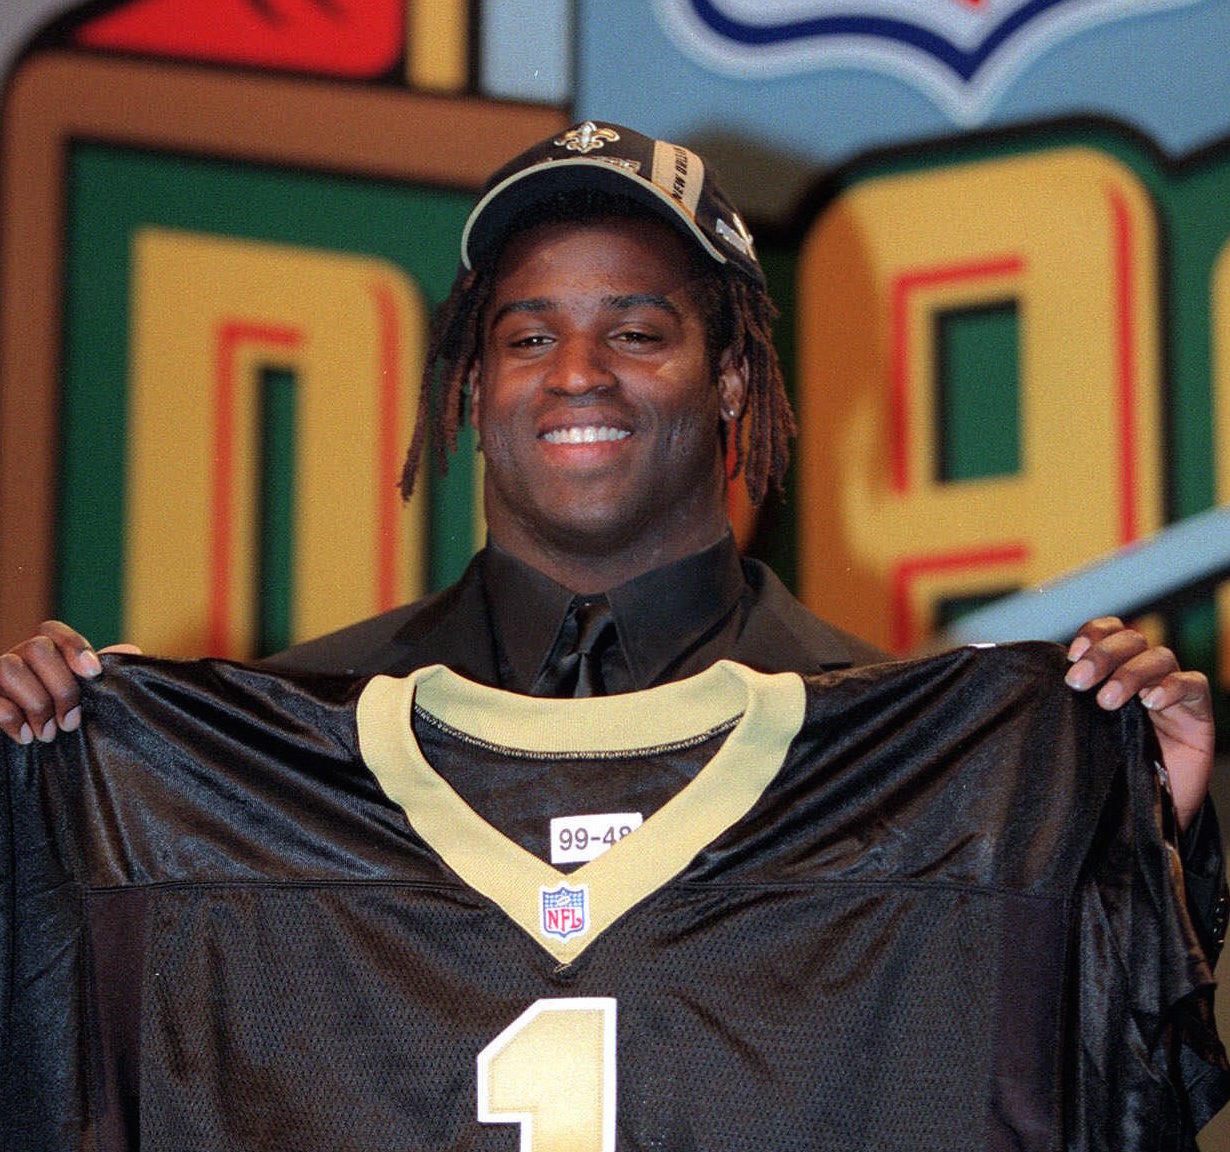 The New Orleans Saints traded a total of eight future draft picks in 1999 and 2000 to the Washington Commanders to get Ricky Williams, the 1998 Heisman Trophy winner. (AP Photo/Suzanne Plunkett)